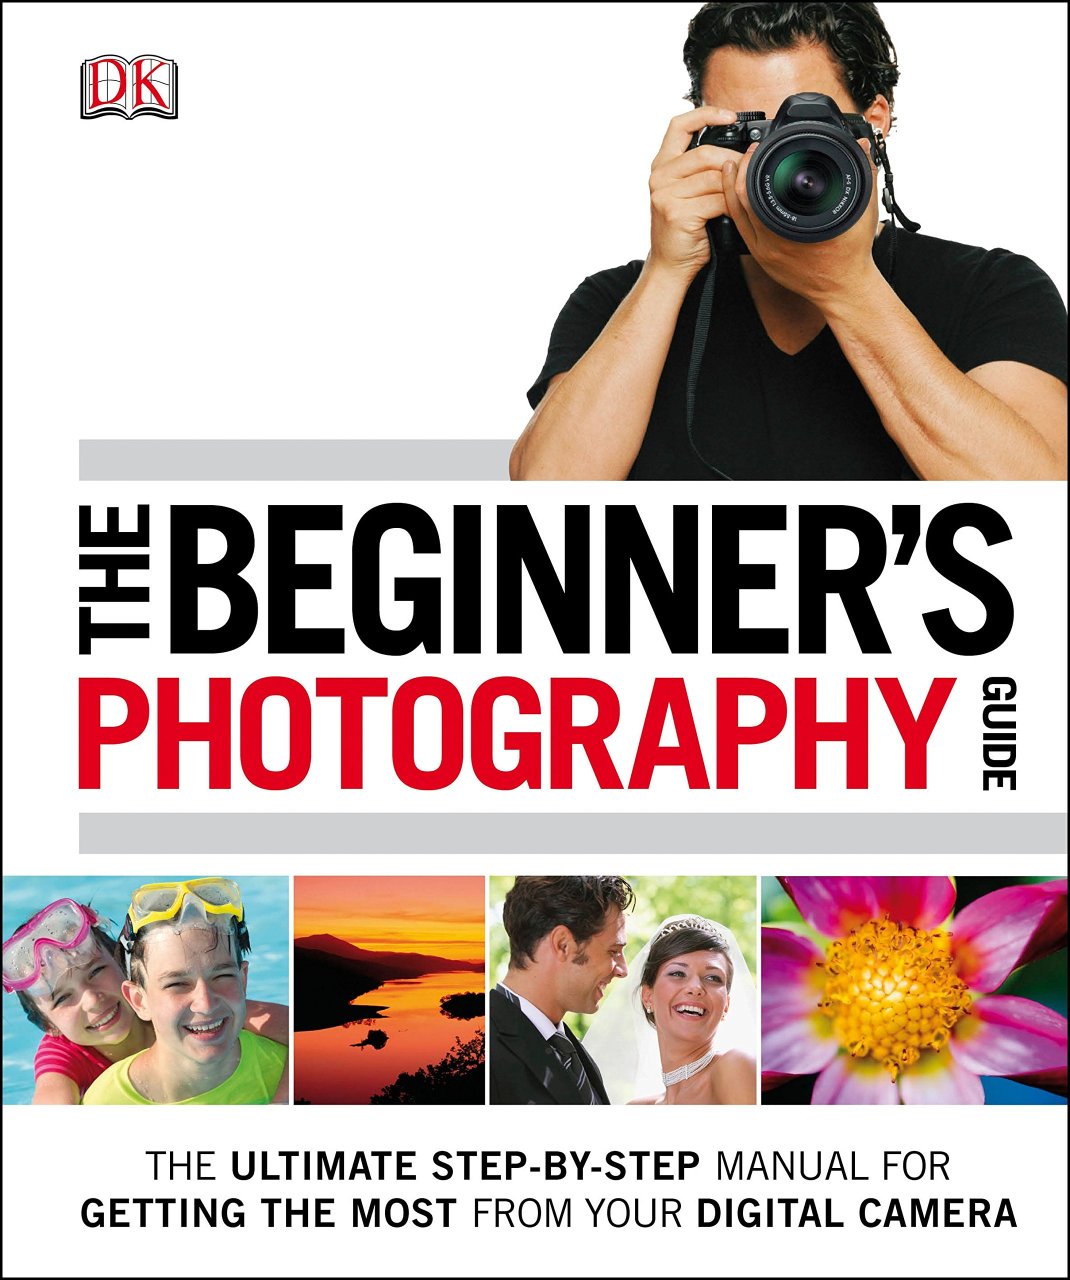 The Beginner's Photography Guide The Ultimate Step By Step Manual For Getting the Most From Your Digital Camera - Kolektif - Dorling Kindersley Publishers LTD